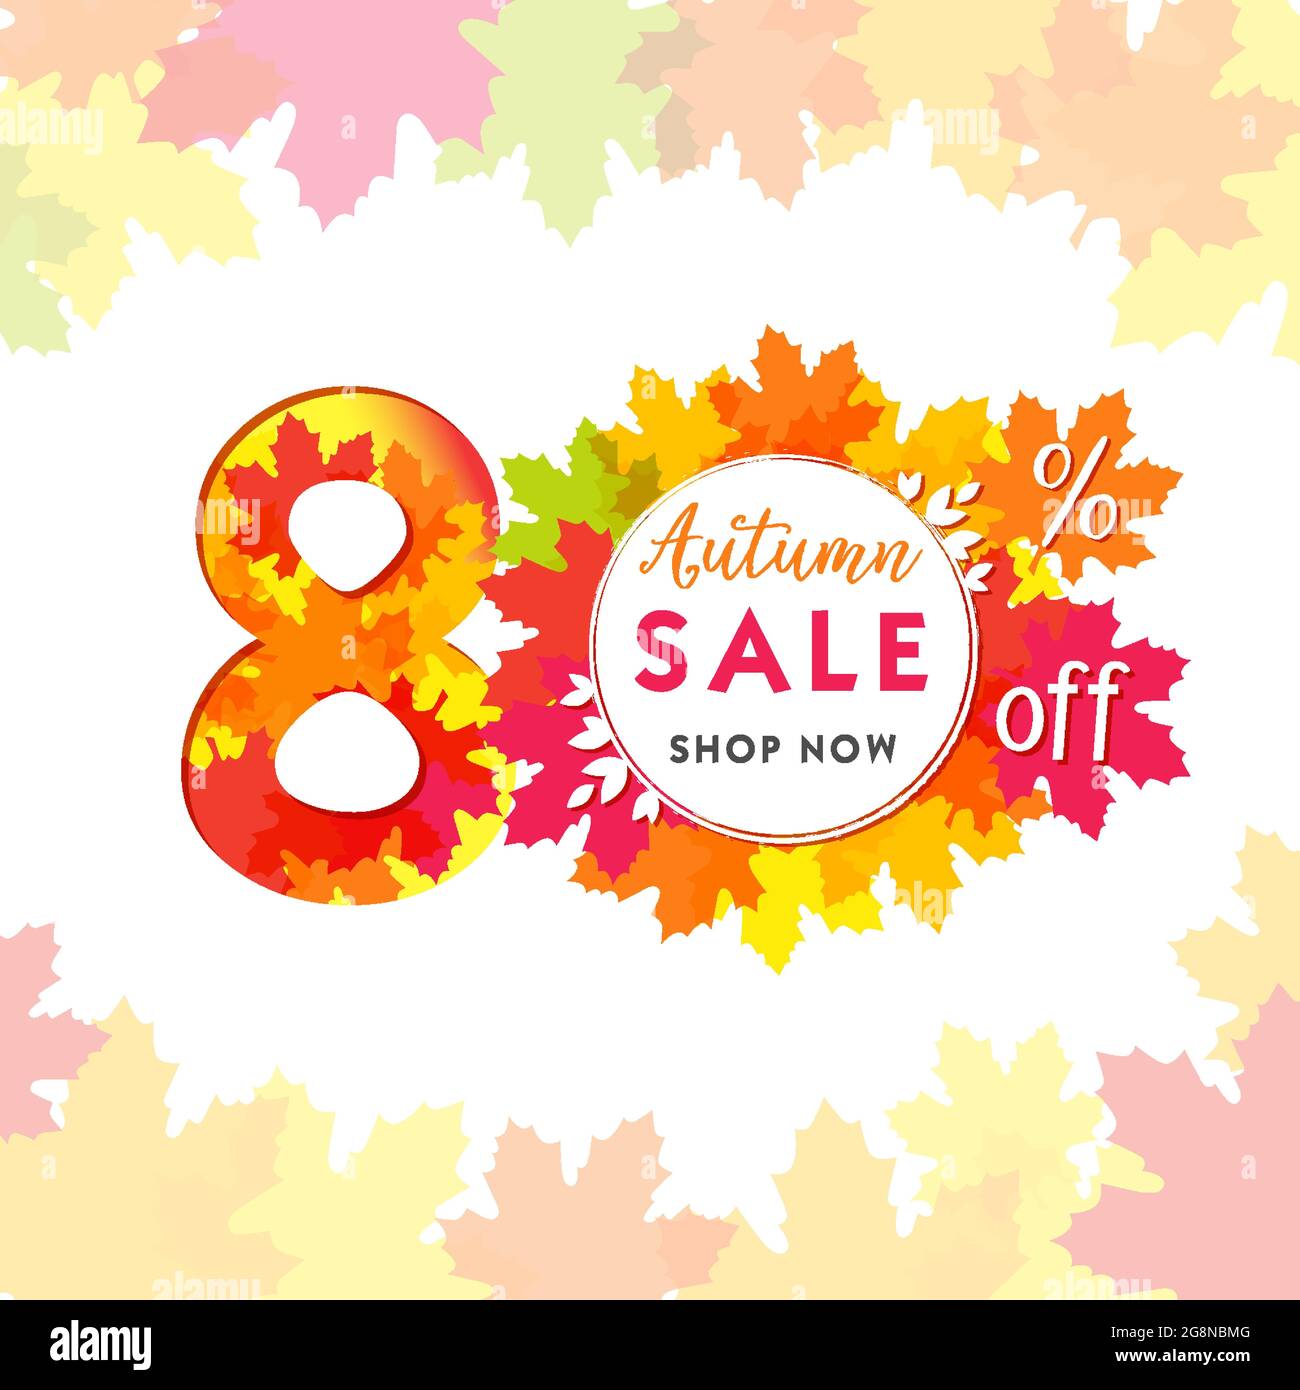 Autumn sale creative number. Seasonal ad poster, red, yellow and orange colors, up to 80 percent off business marketing banner. Fall seasonal advertis Stock Vector